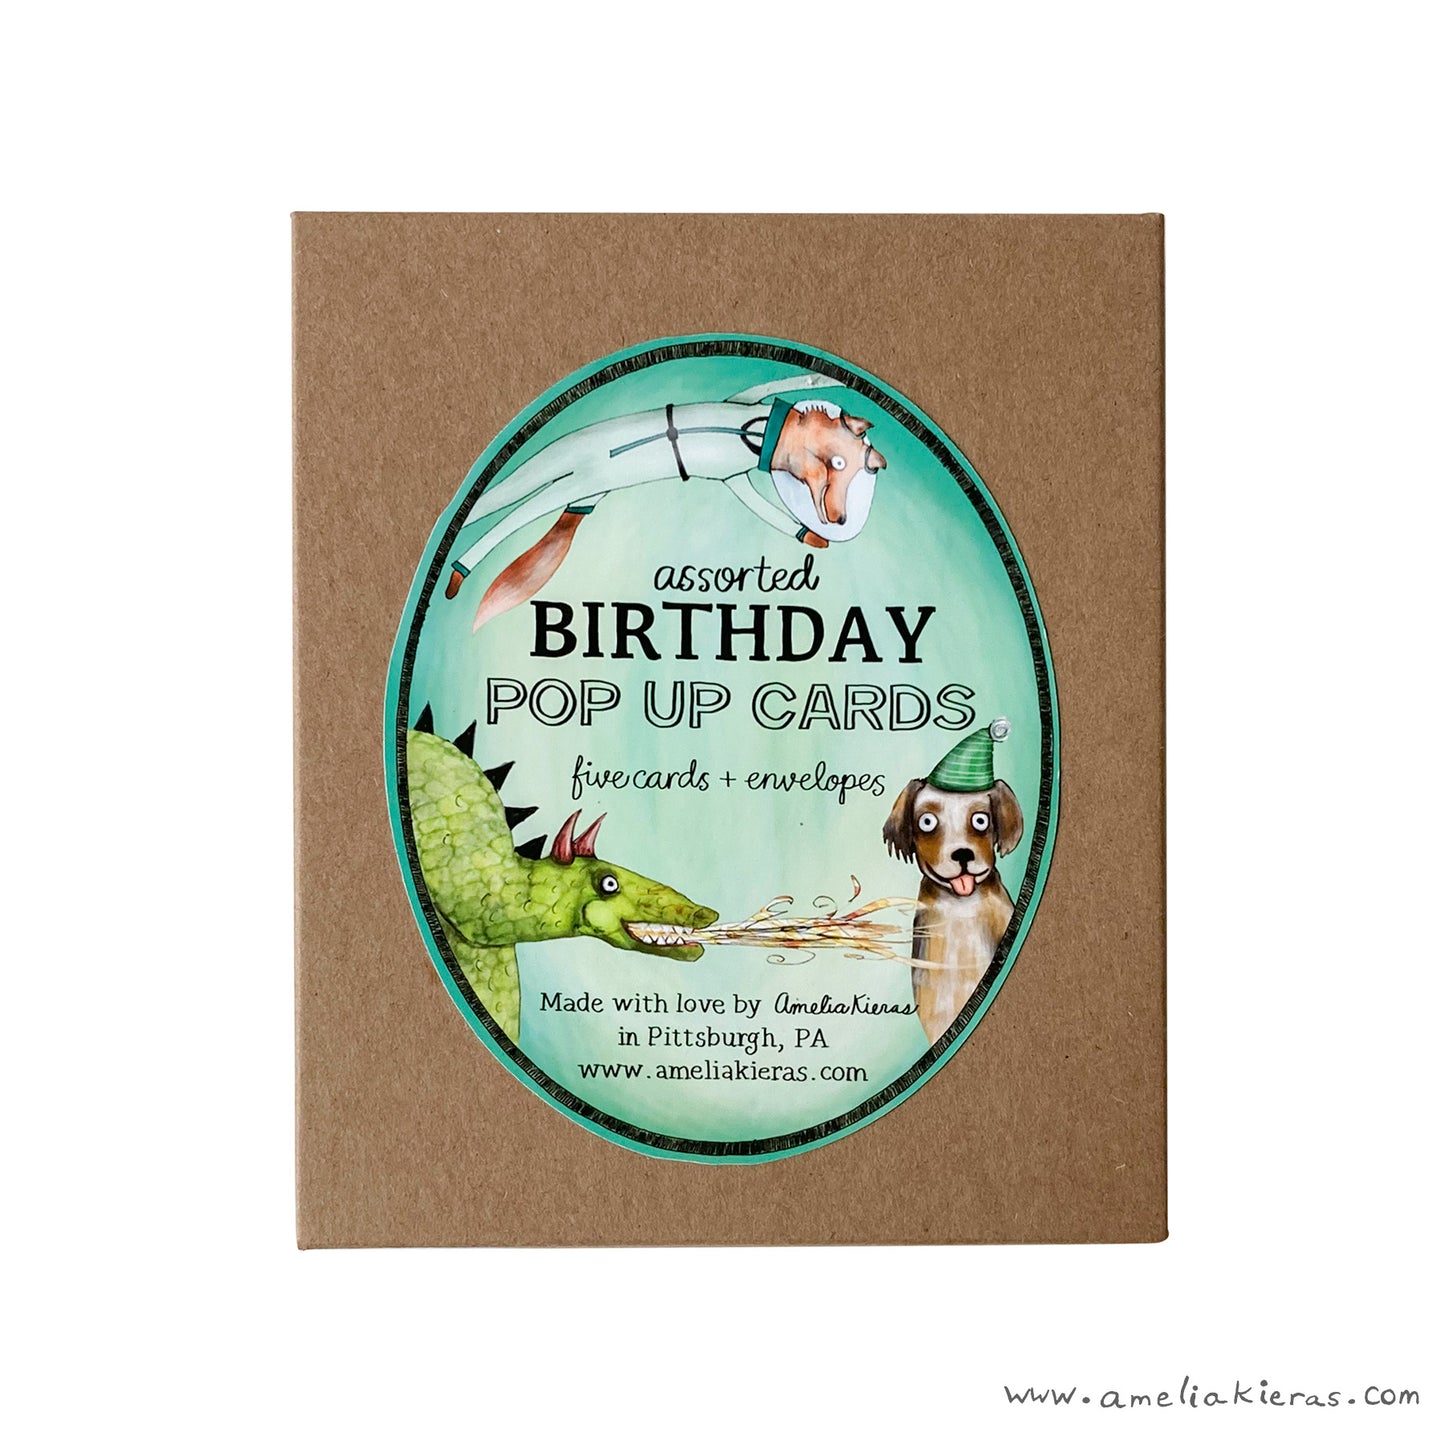 Birthday Pop Up Card Box Set - Set of Five Assorted Pop Up Cards